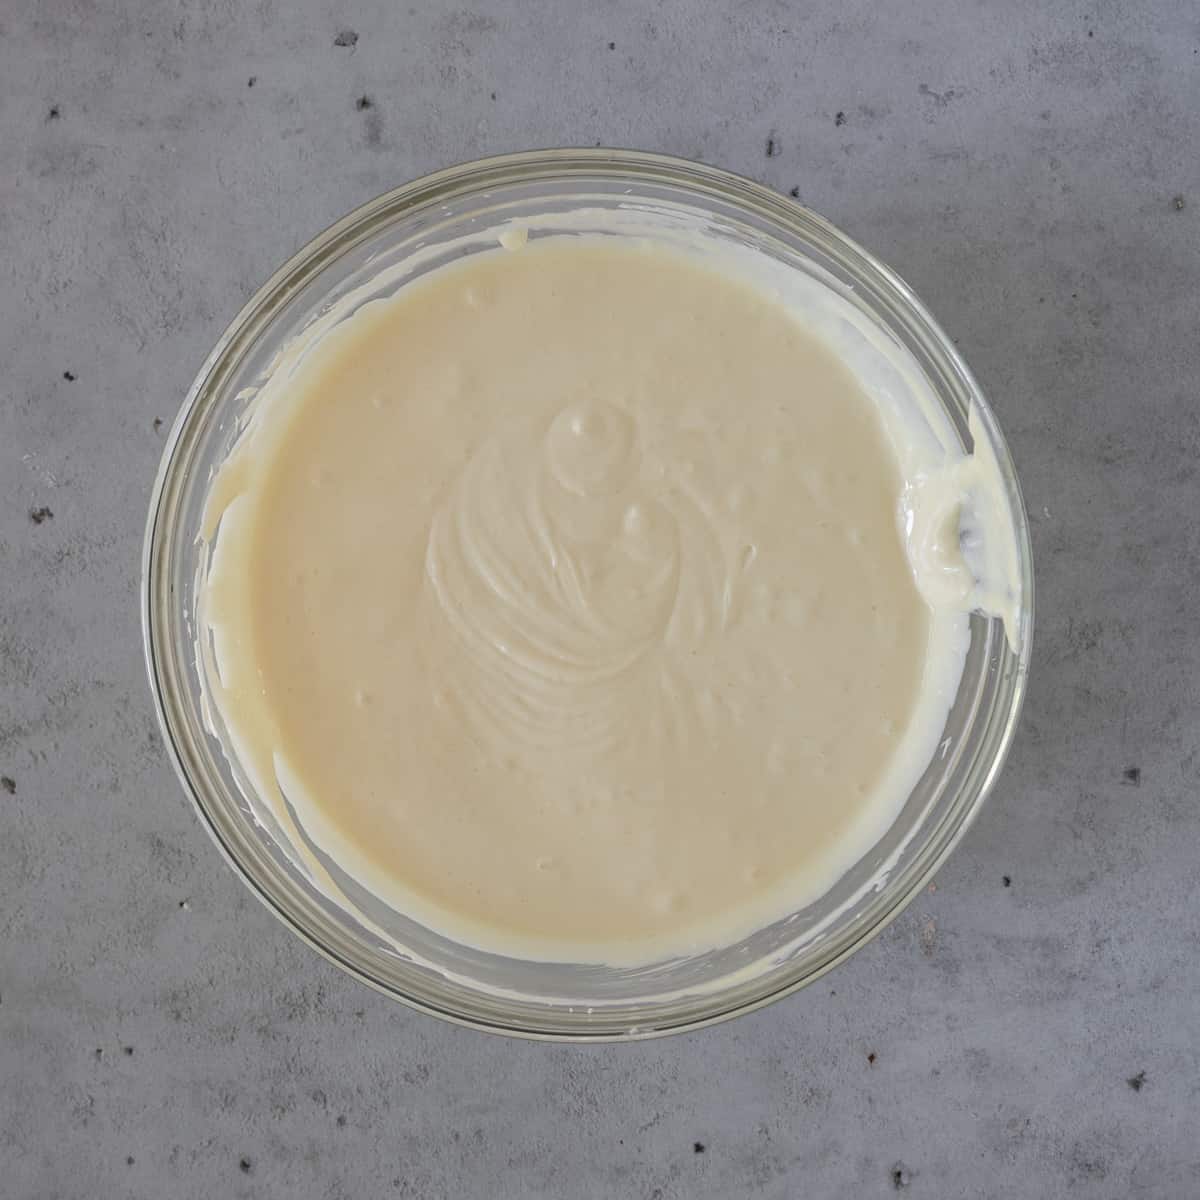 the cream cheese, sugar, and eggs combined in a glass bowl on a grey background.